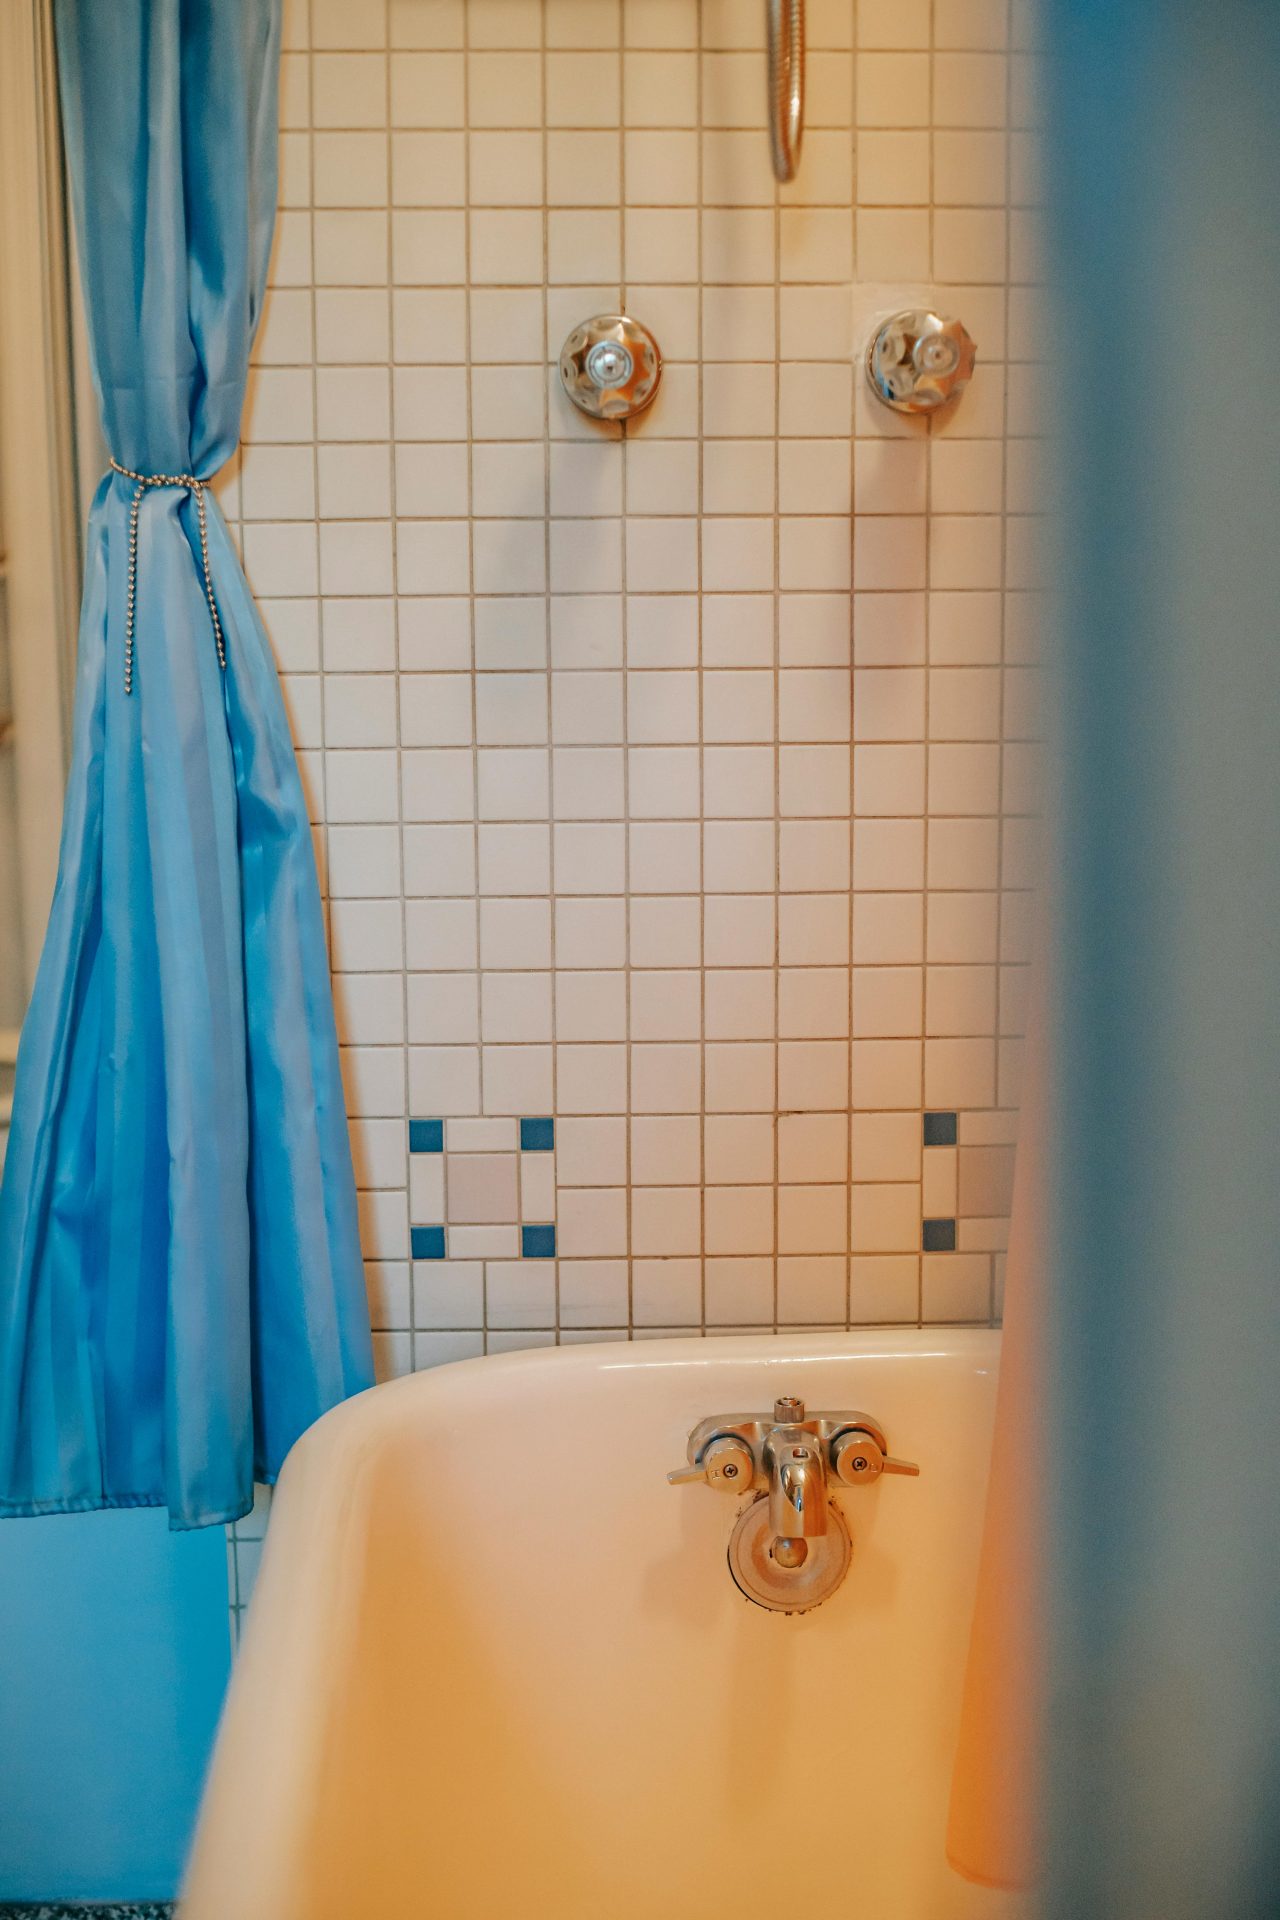 Benefits of Updating Your Shower Curtain